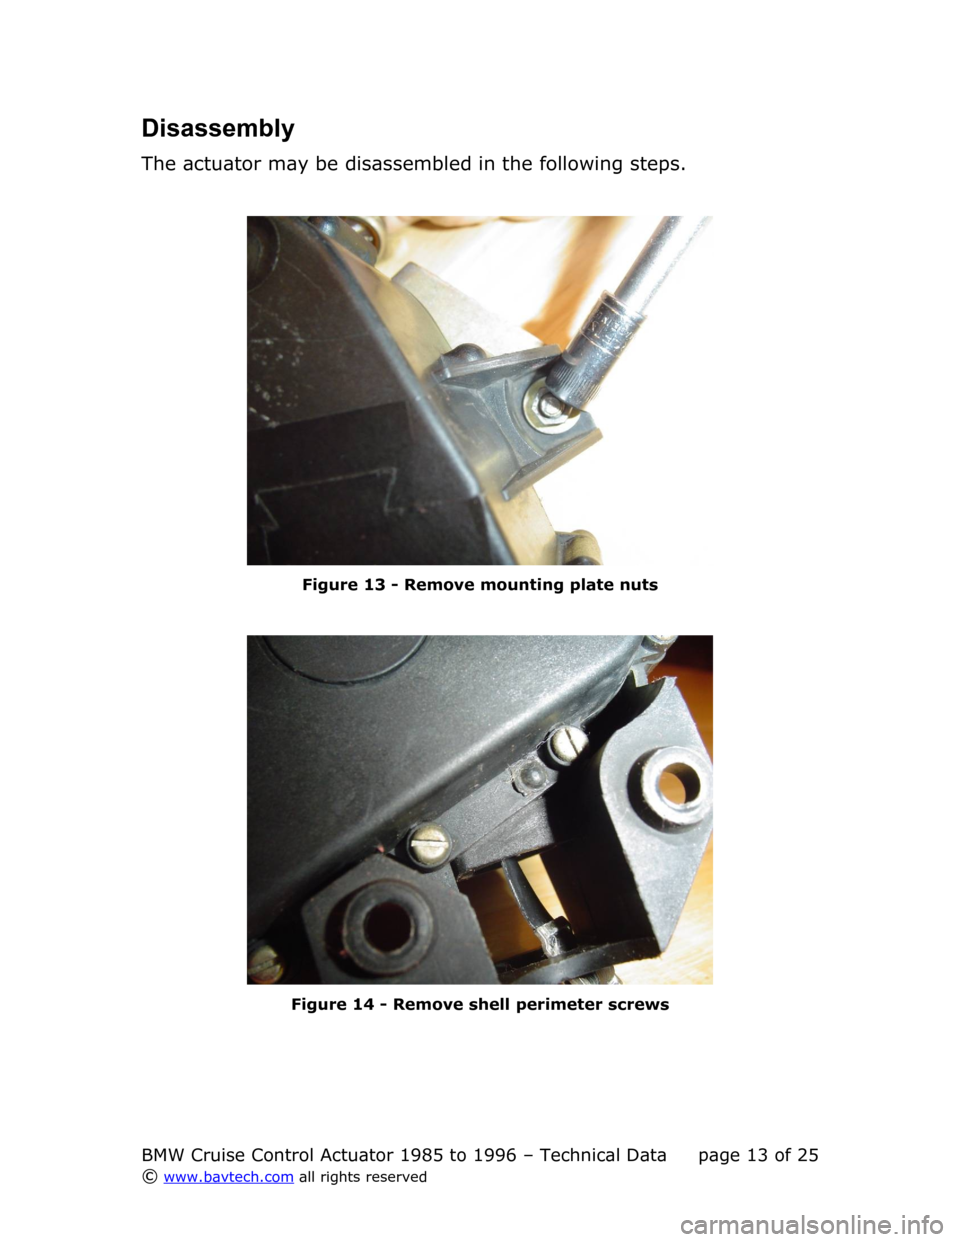 BMW 8 SERIES 1993 E31 Cruise Control Acutator Disassembly
The actuator may be disassembled in the following steps.
Figure  13  - Remove mounting plate nuts
Figure  14  - Remove shell perimeter screws
BMW Cruise Control Actuator 1985 to 1996 – T